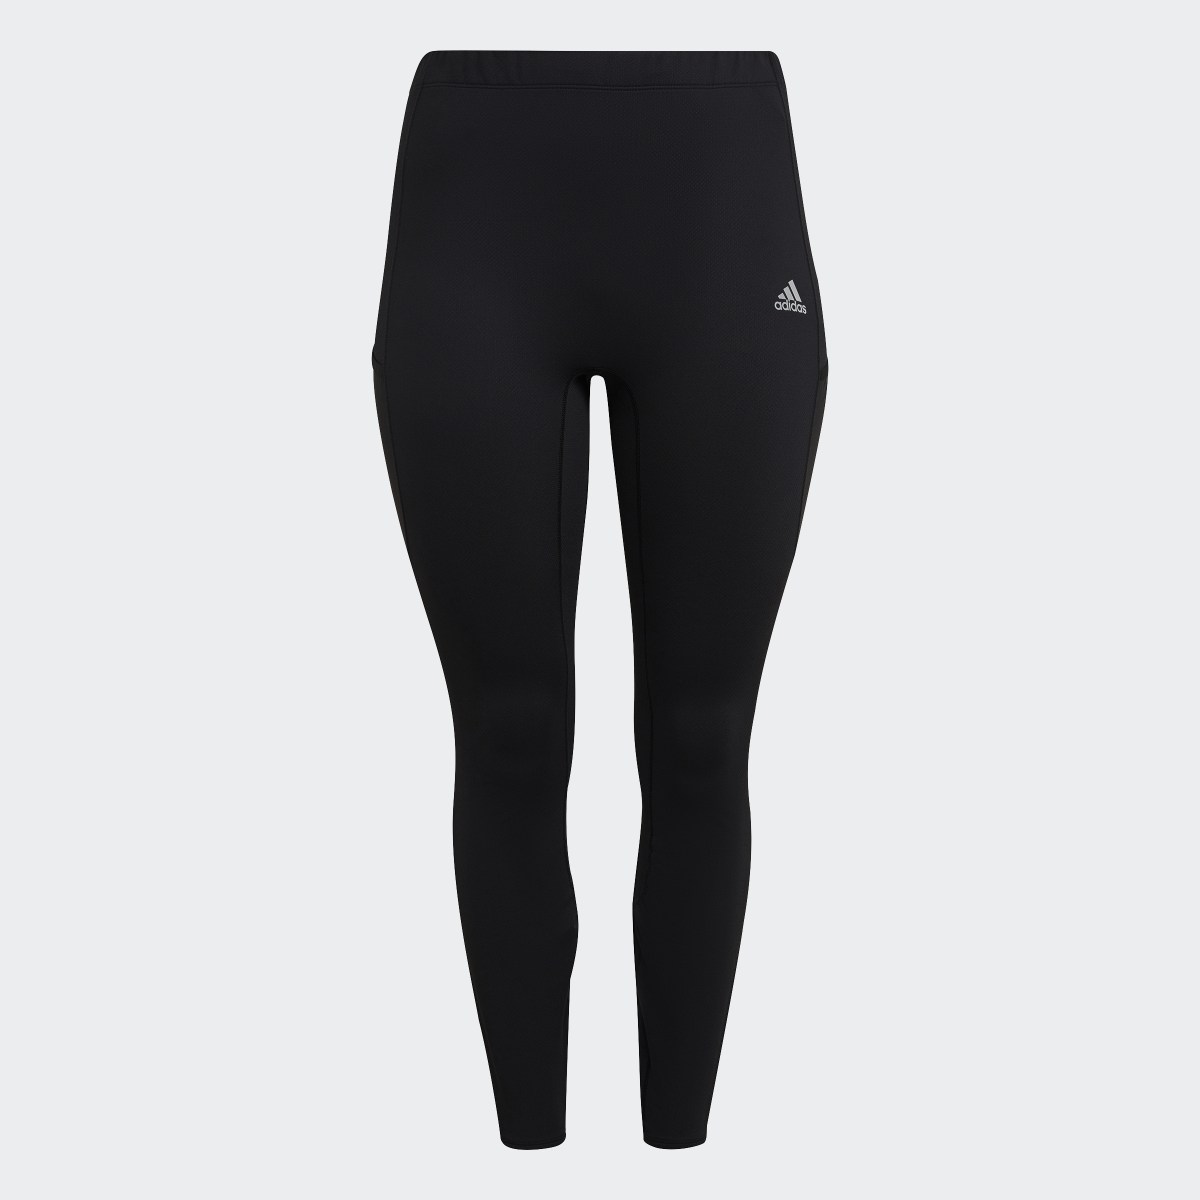 Adidas FastImpact COLD.RDY Winter Running Long Leggings (Plus Size). 4